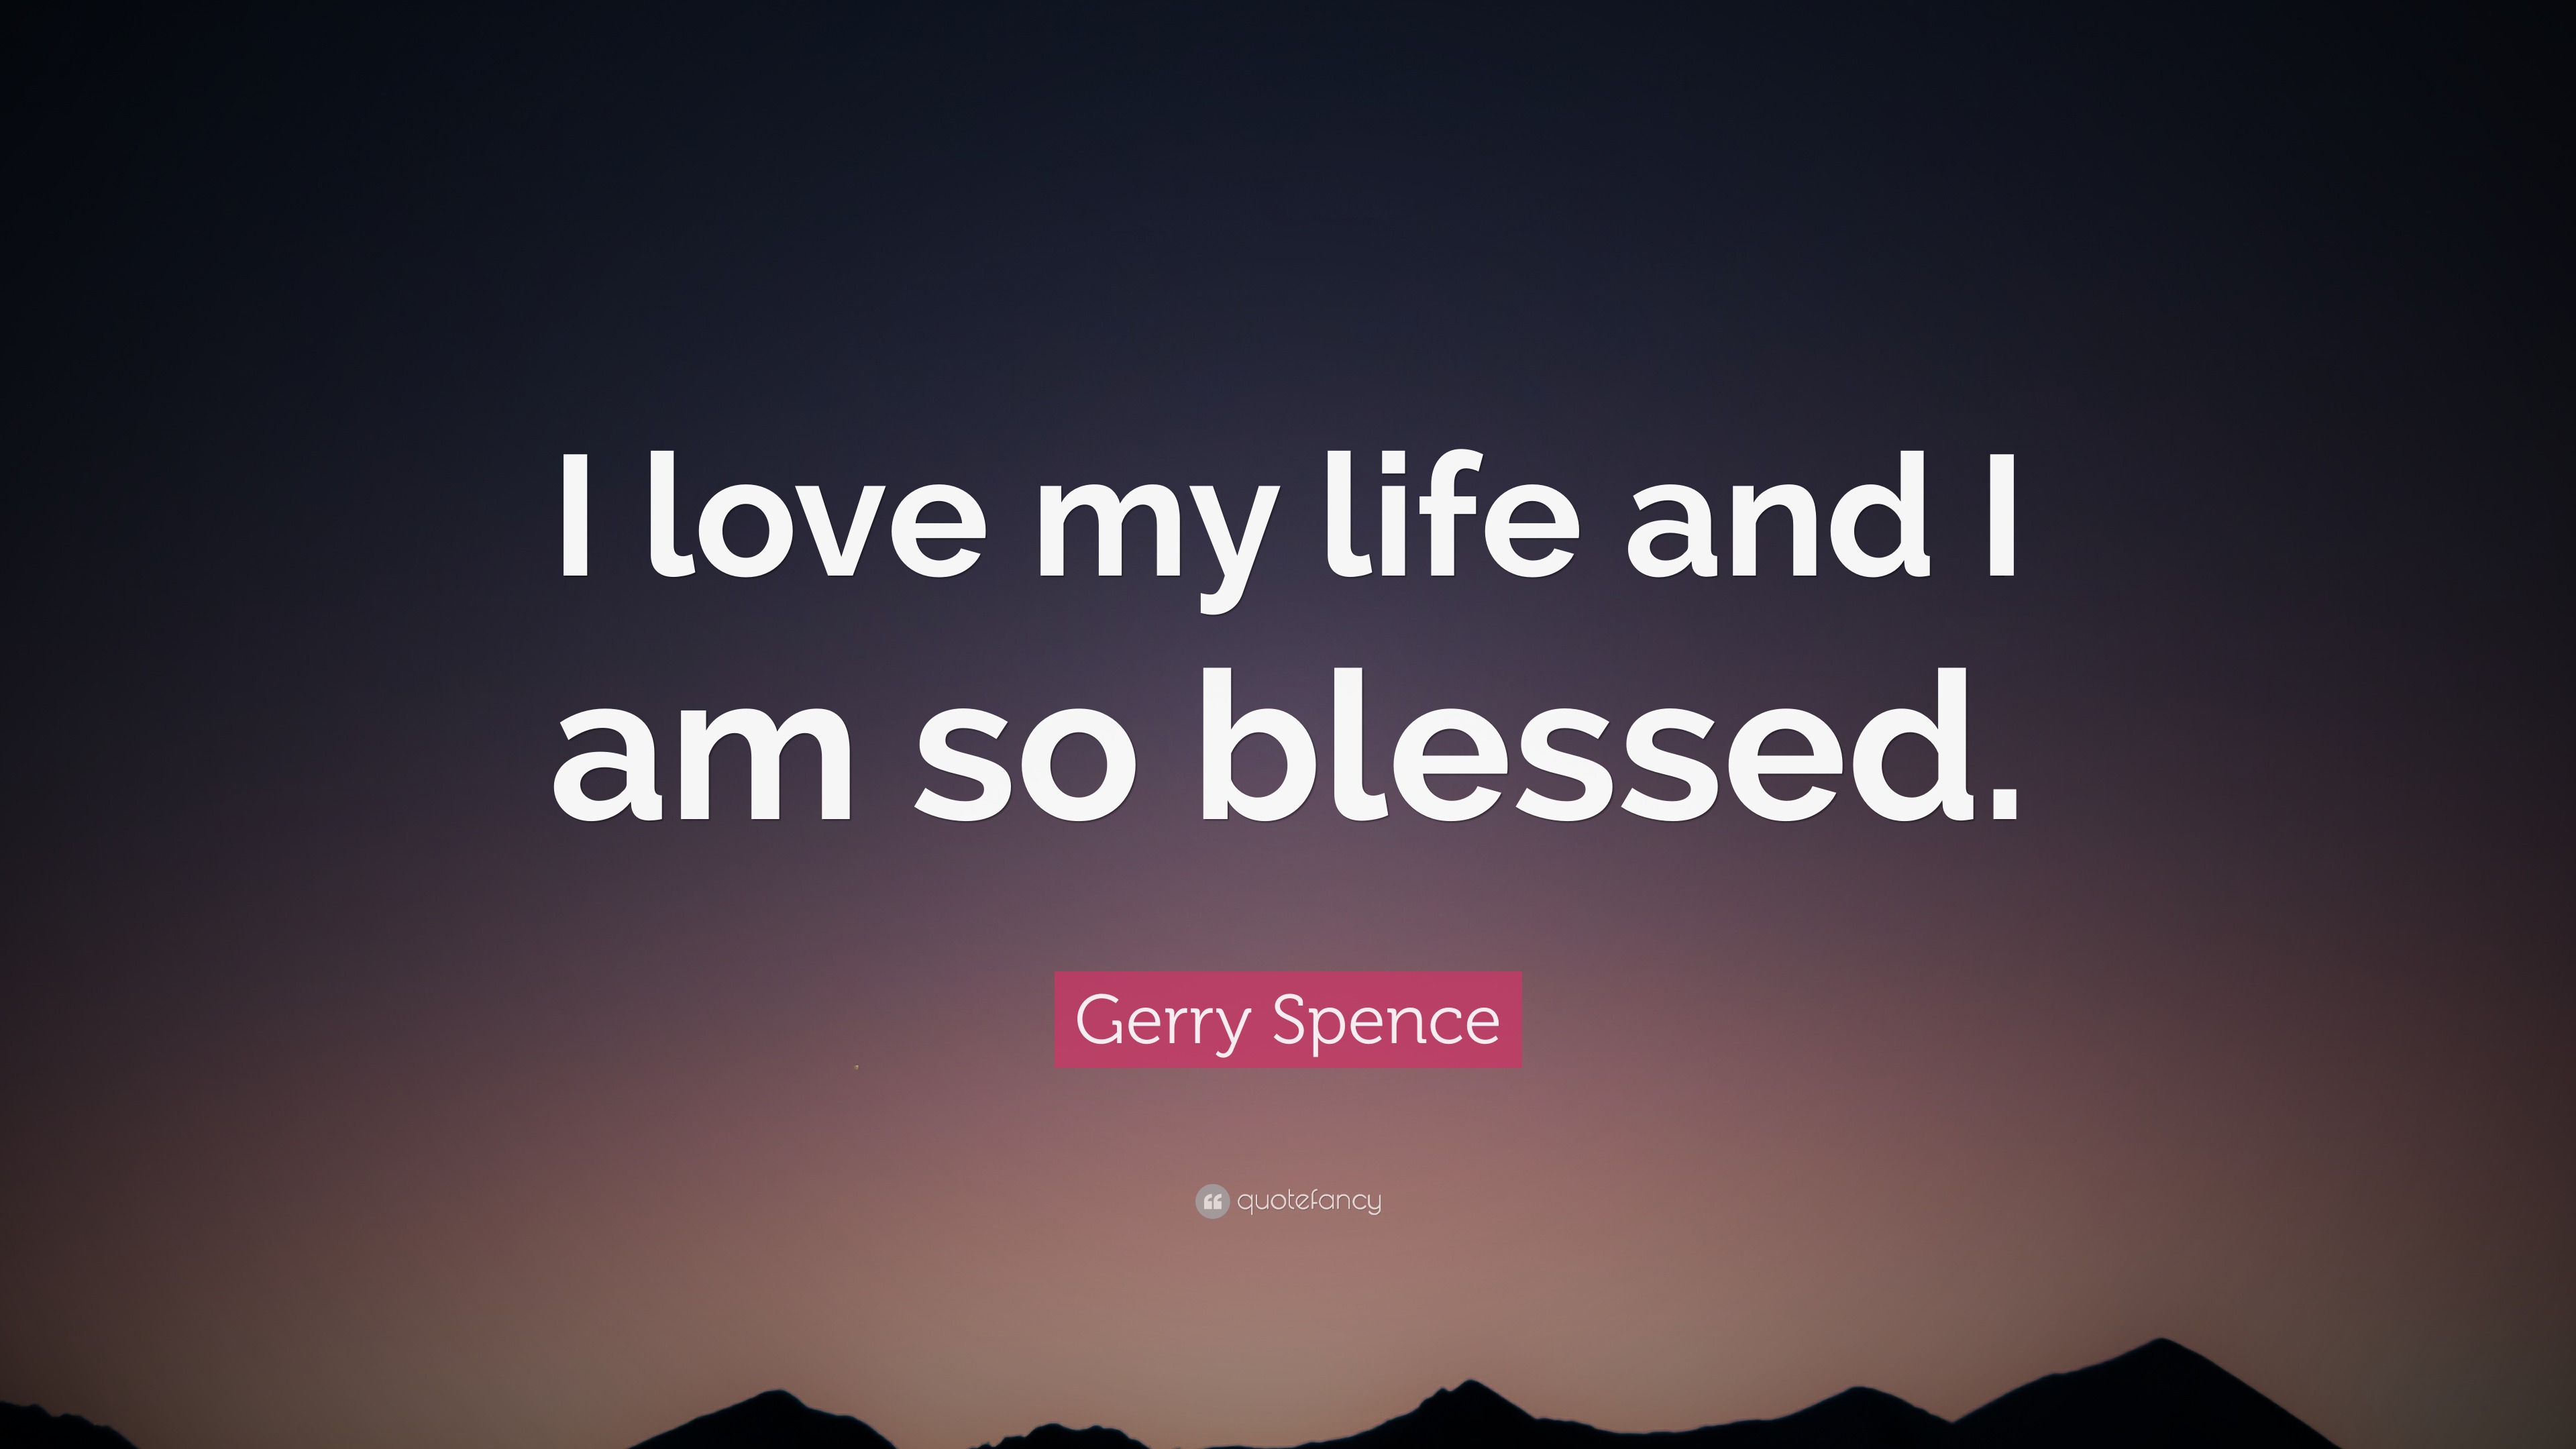 Gerry Spence Quote “I love my life and I am so blessed ”